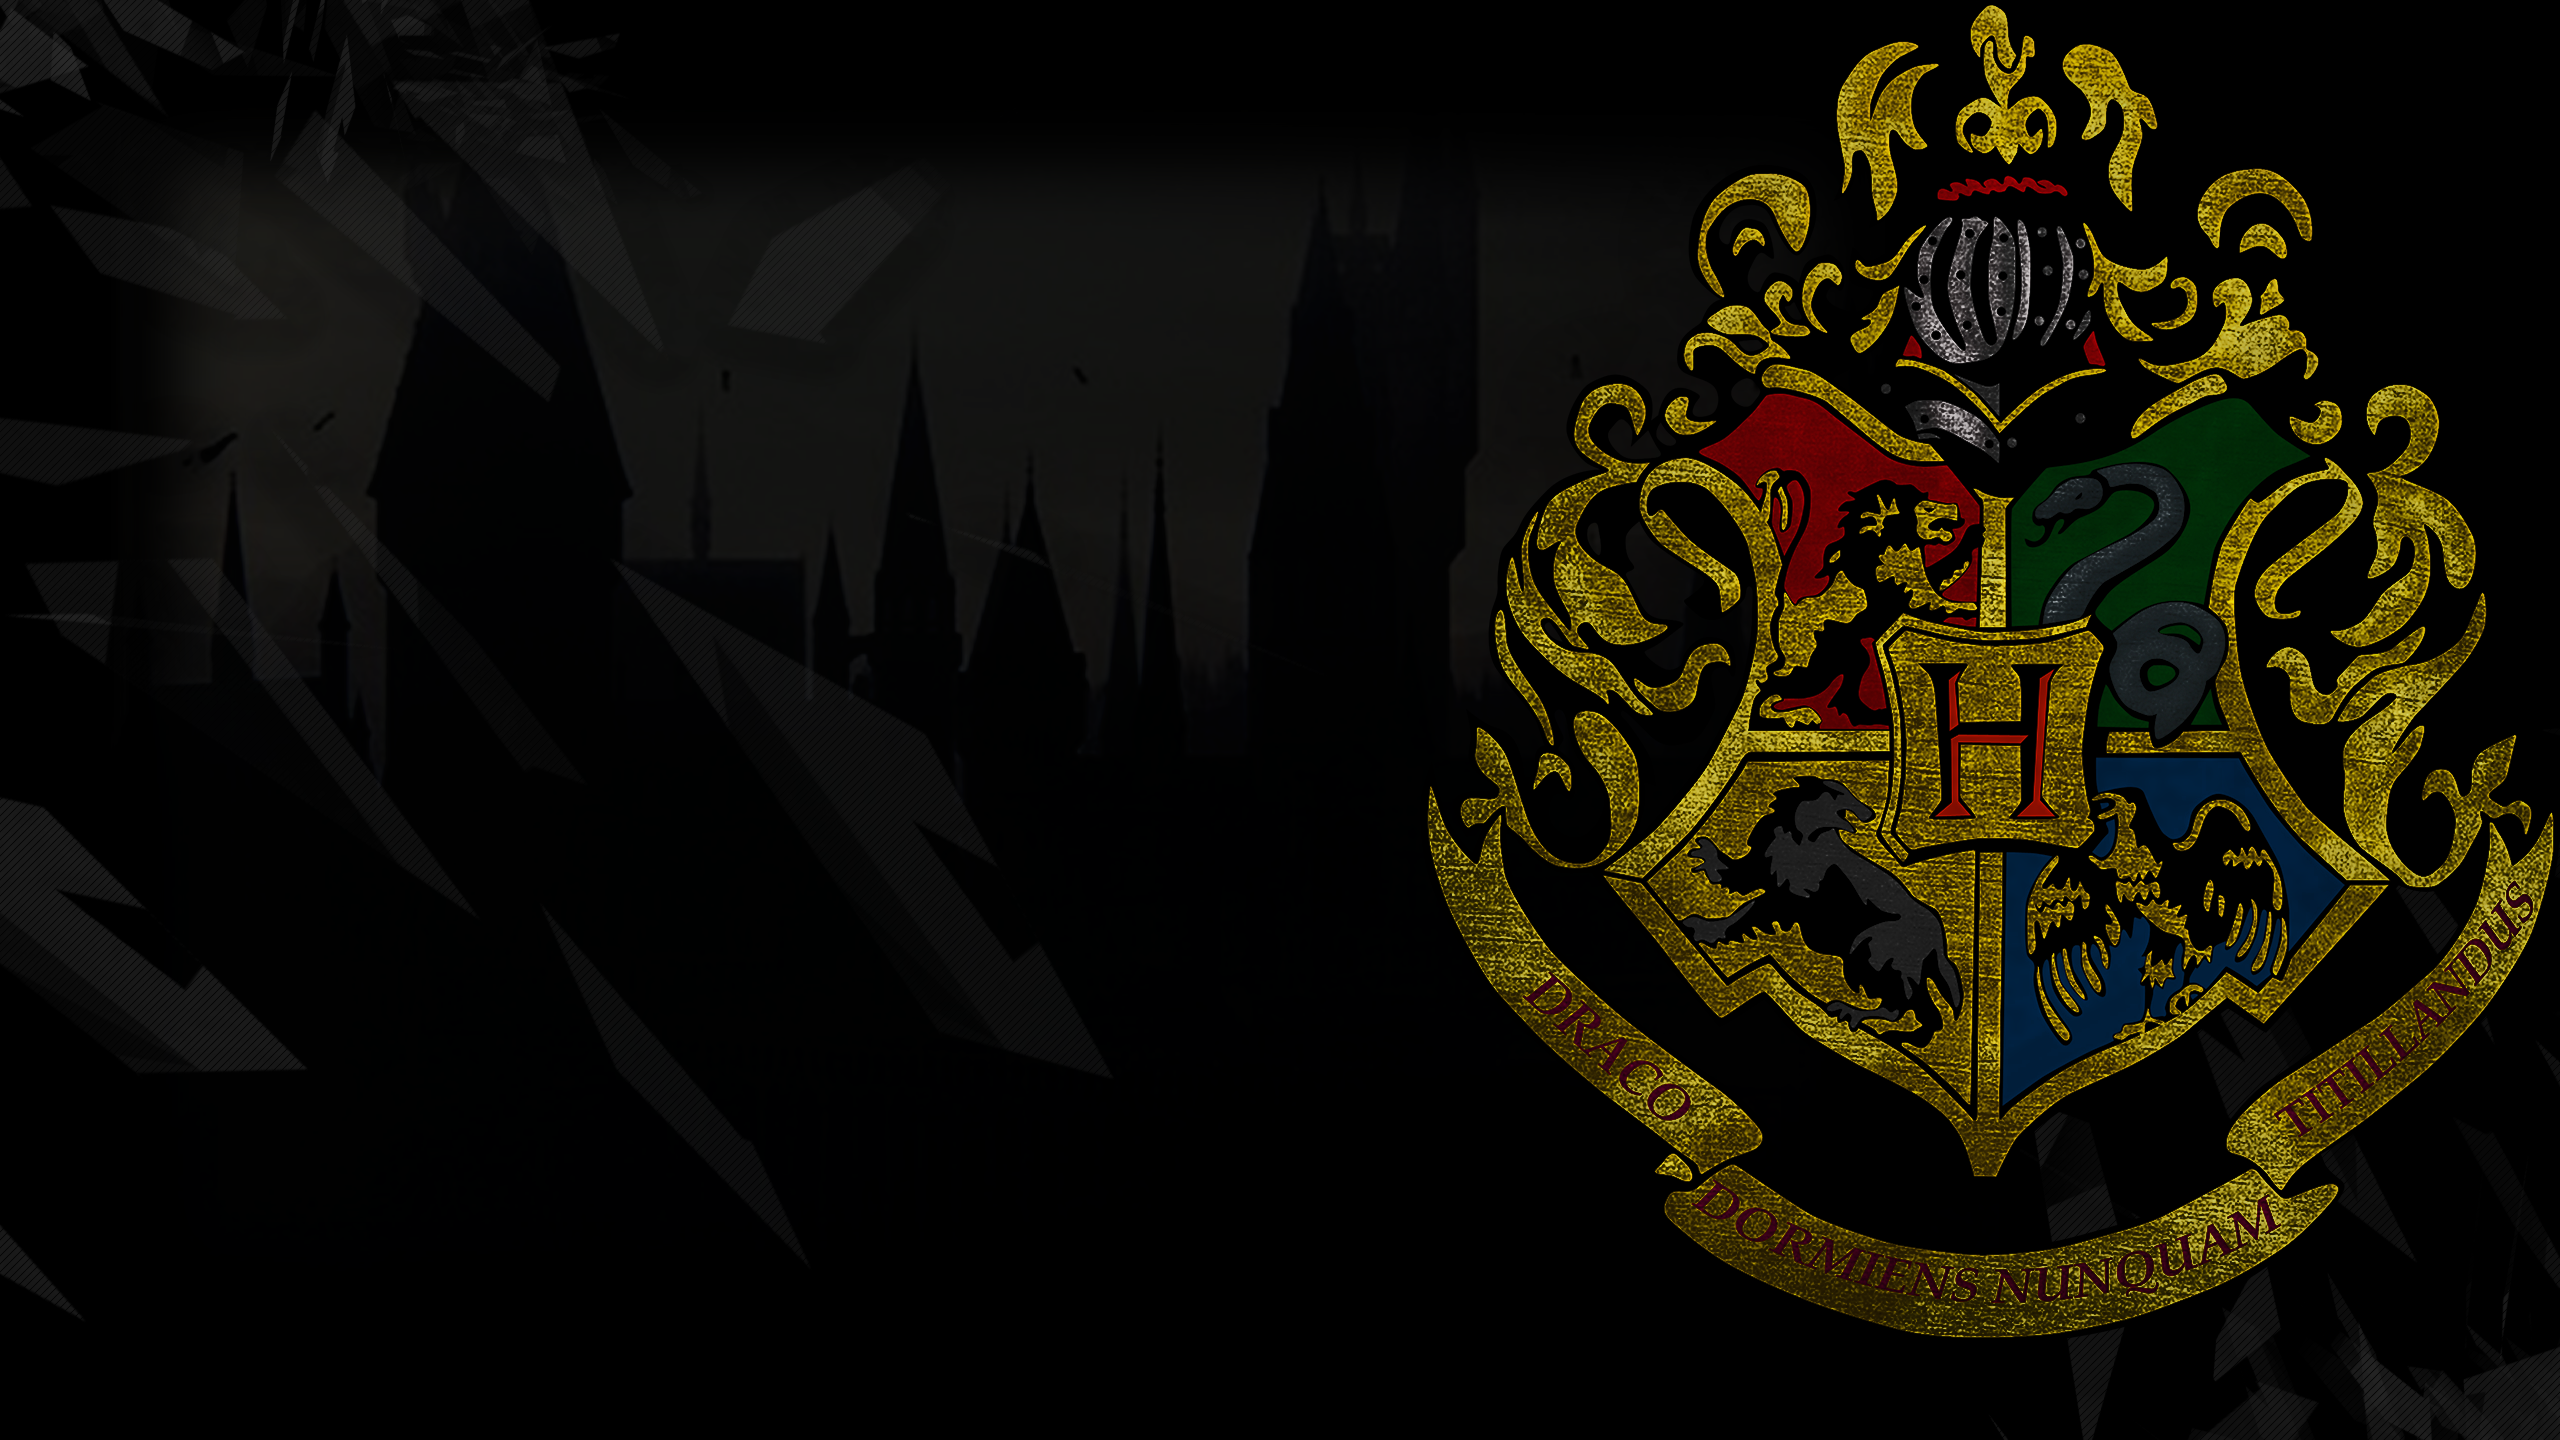 Harry Potter Wallpapers, Pictures, Images